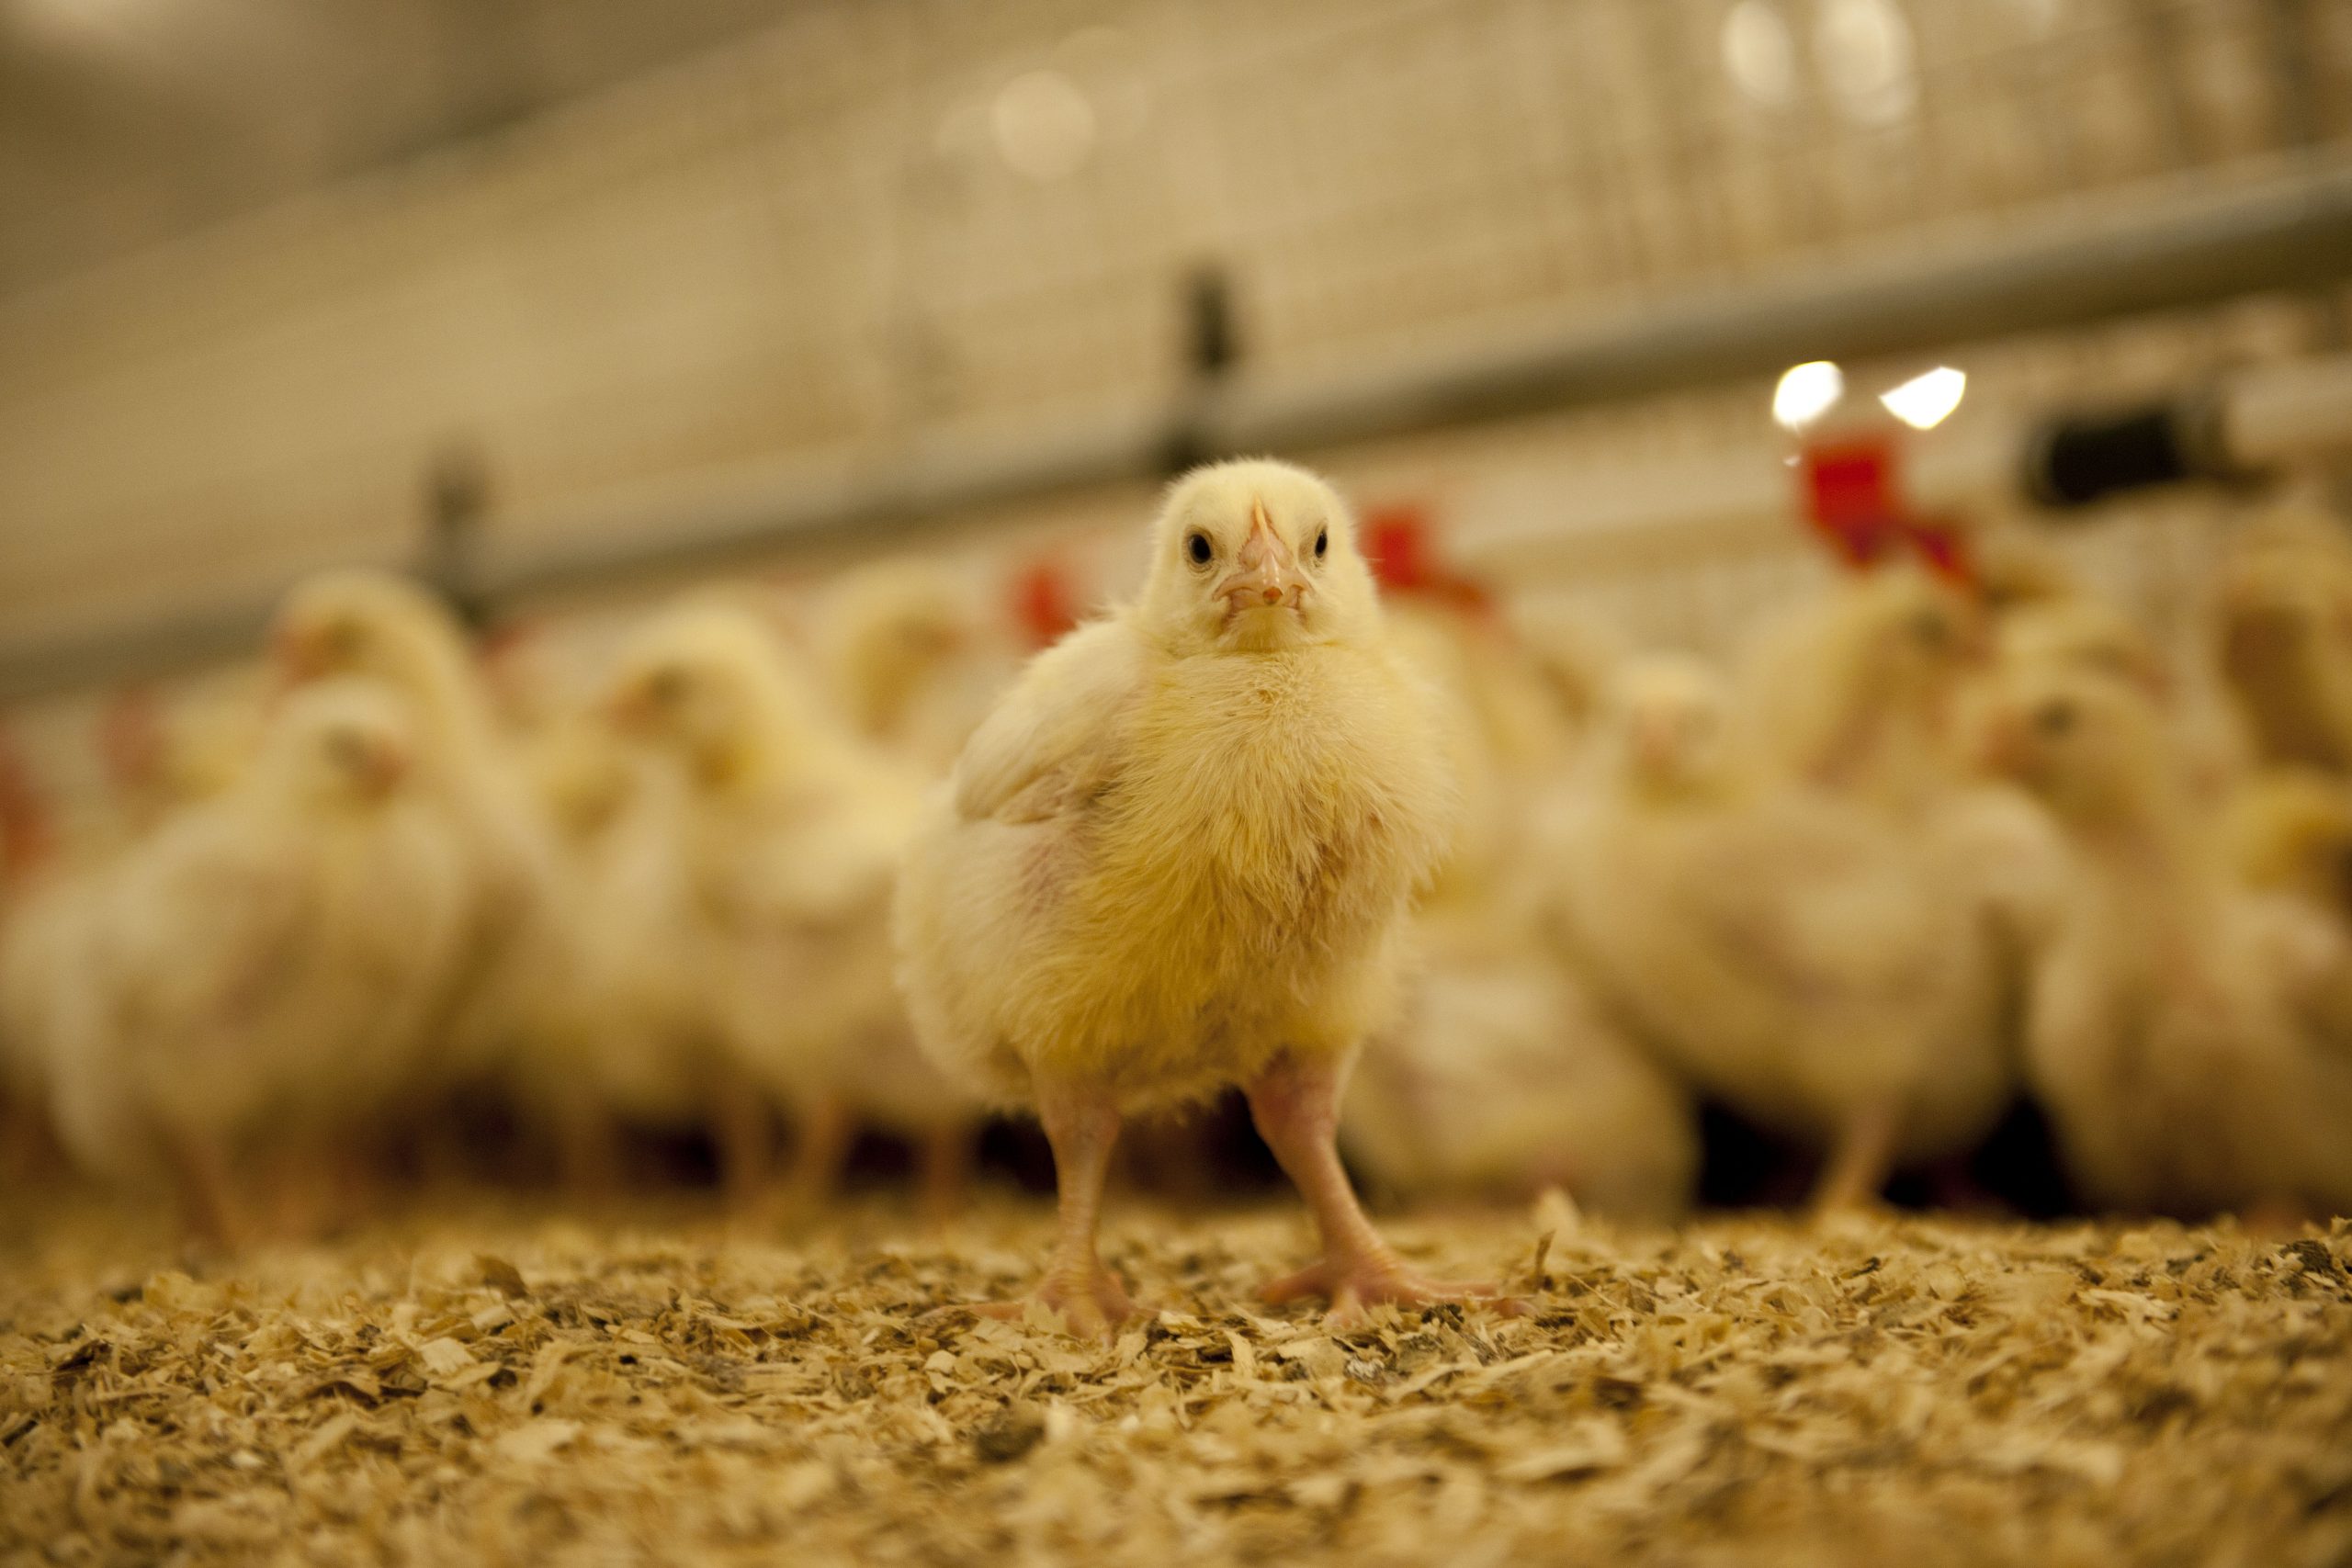 Multi-enzyme solutions for sustainable poultry. Photo: Mark Pasveer